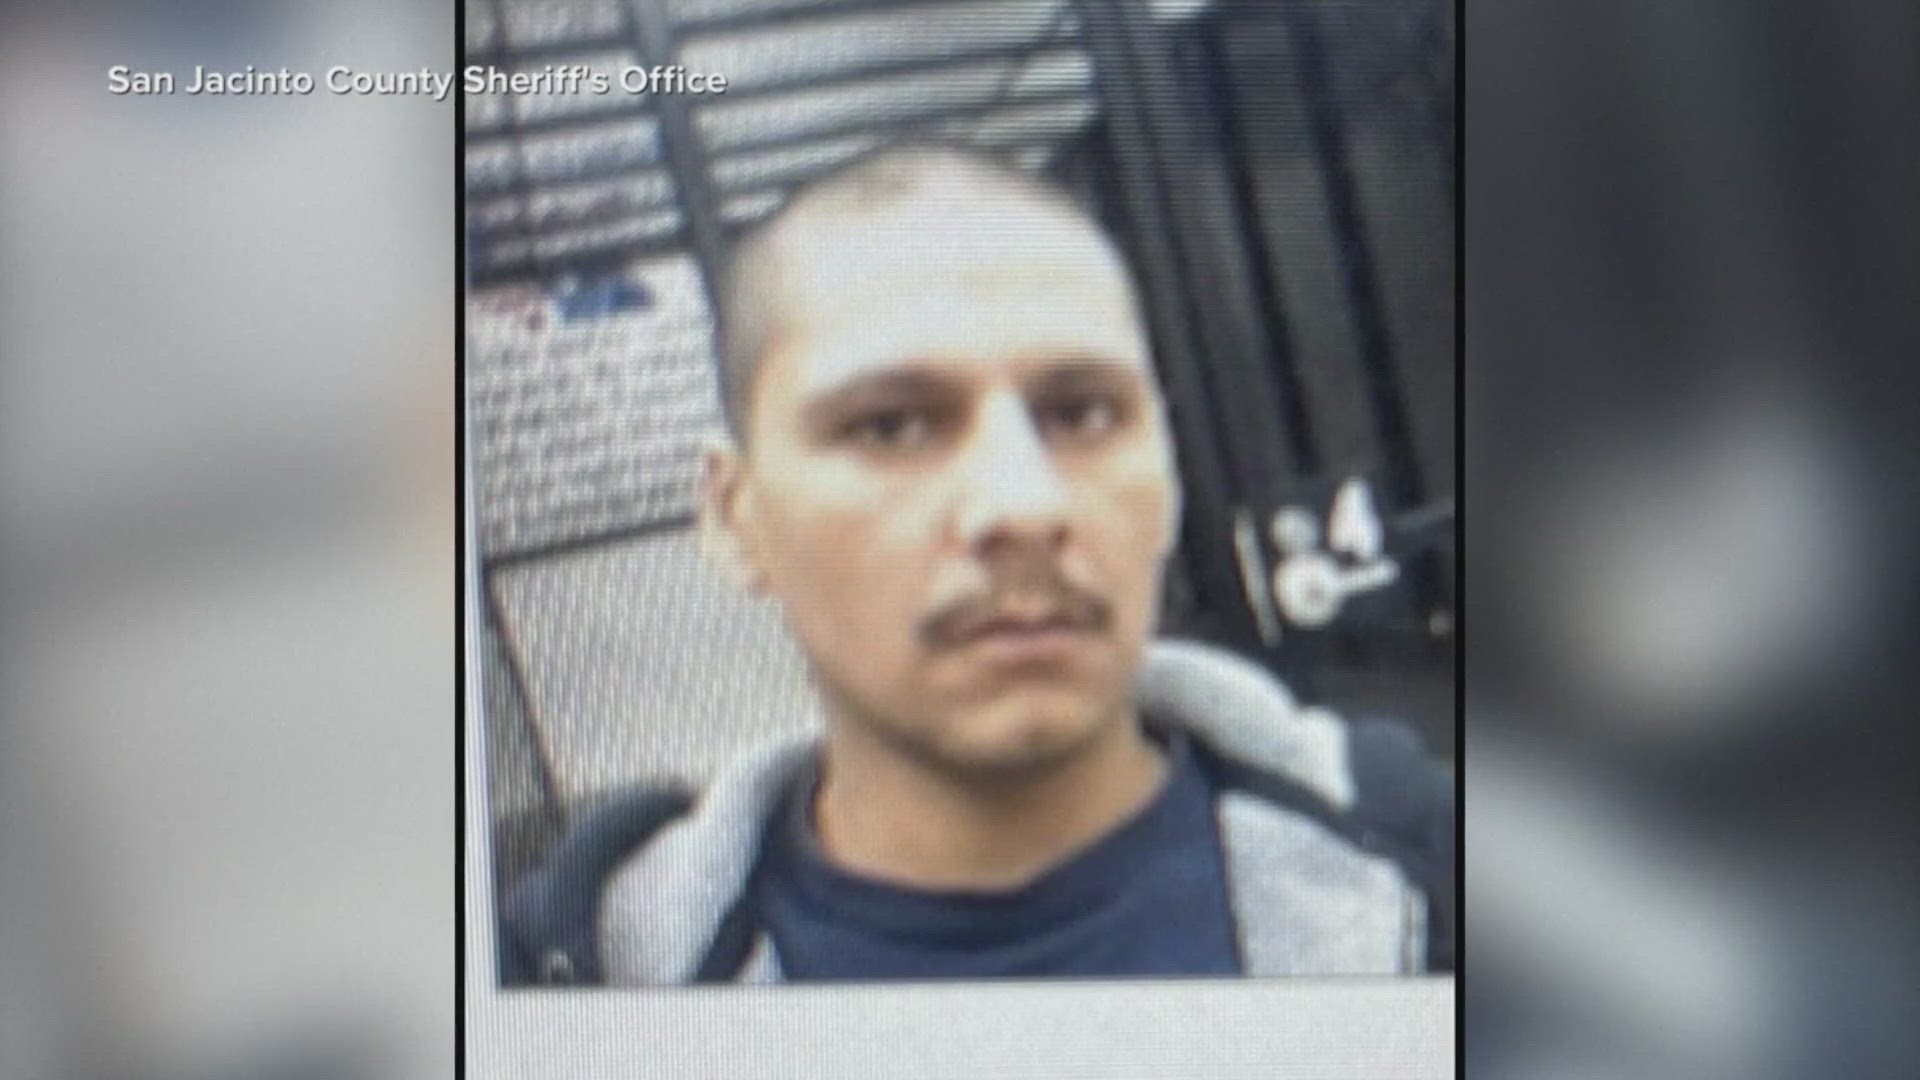 The sheriff's office said all five victims were shot from the neck up "almost execution-style." Officials said they're looking for 38-year-old Francisco Oropeza.